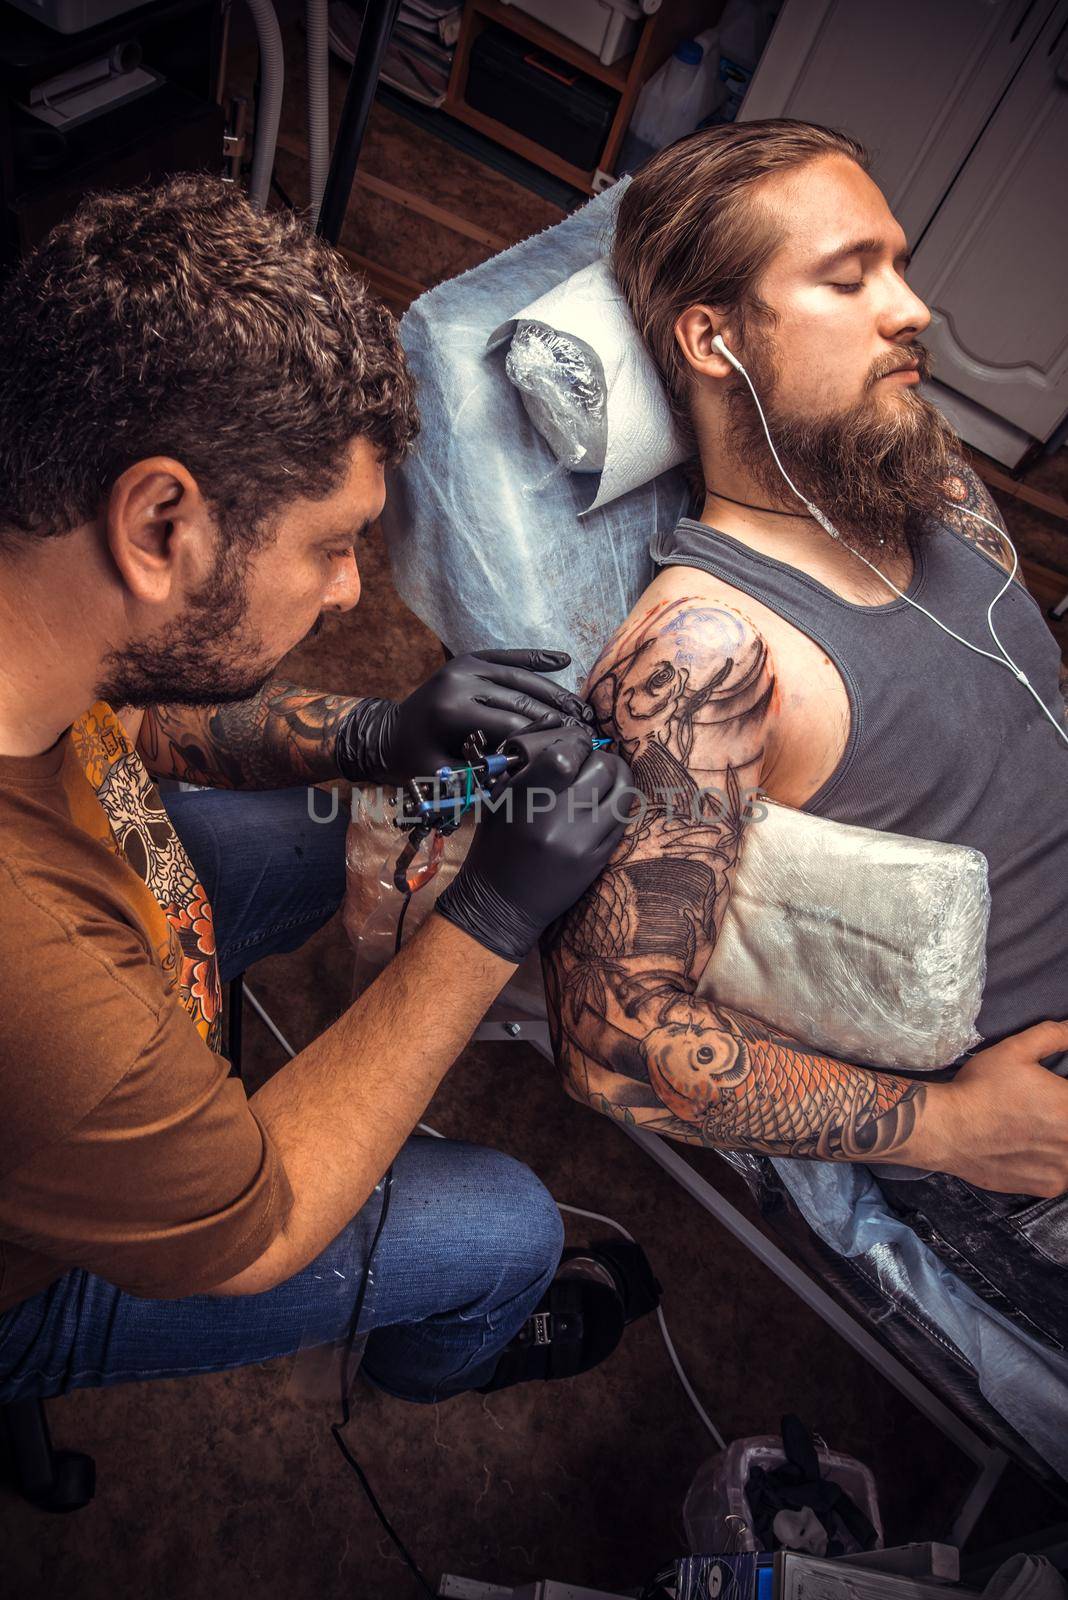 Tattooist makes tattoo pictures in tattoo parlor./Man wearing gloves doing tattoo in salon.